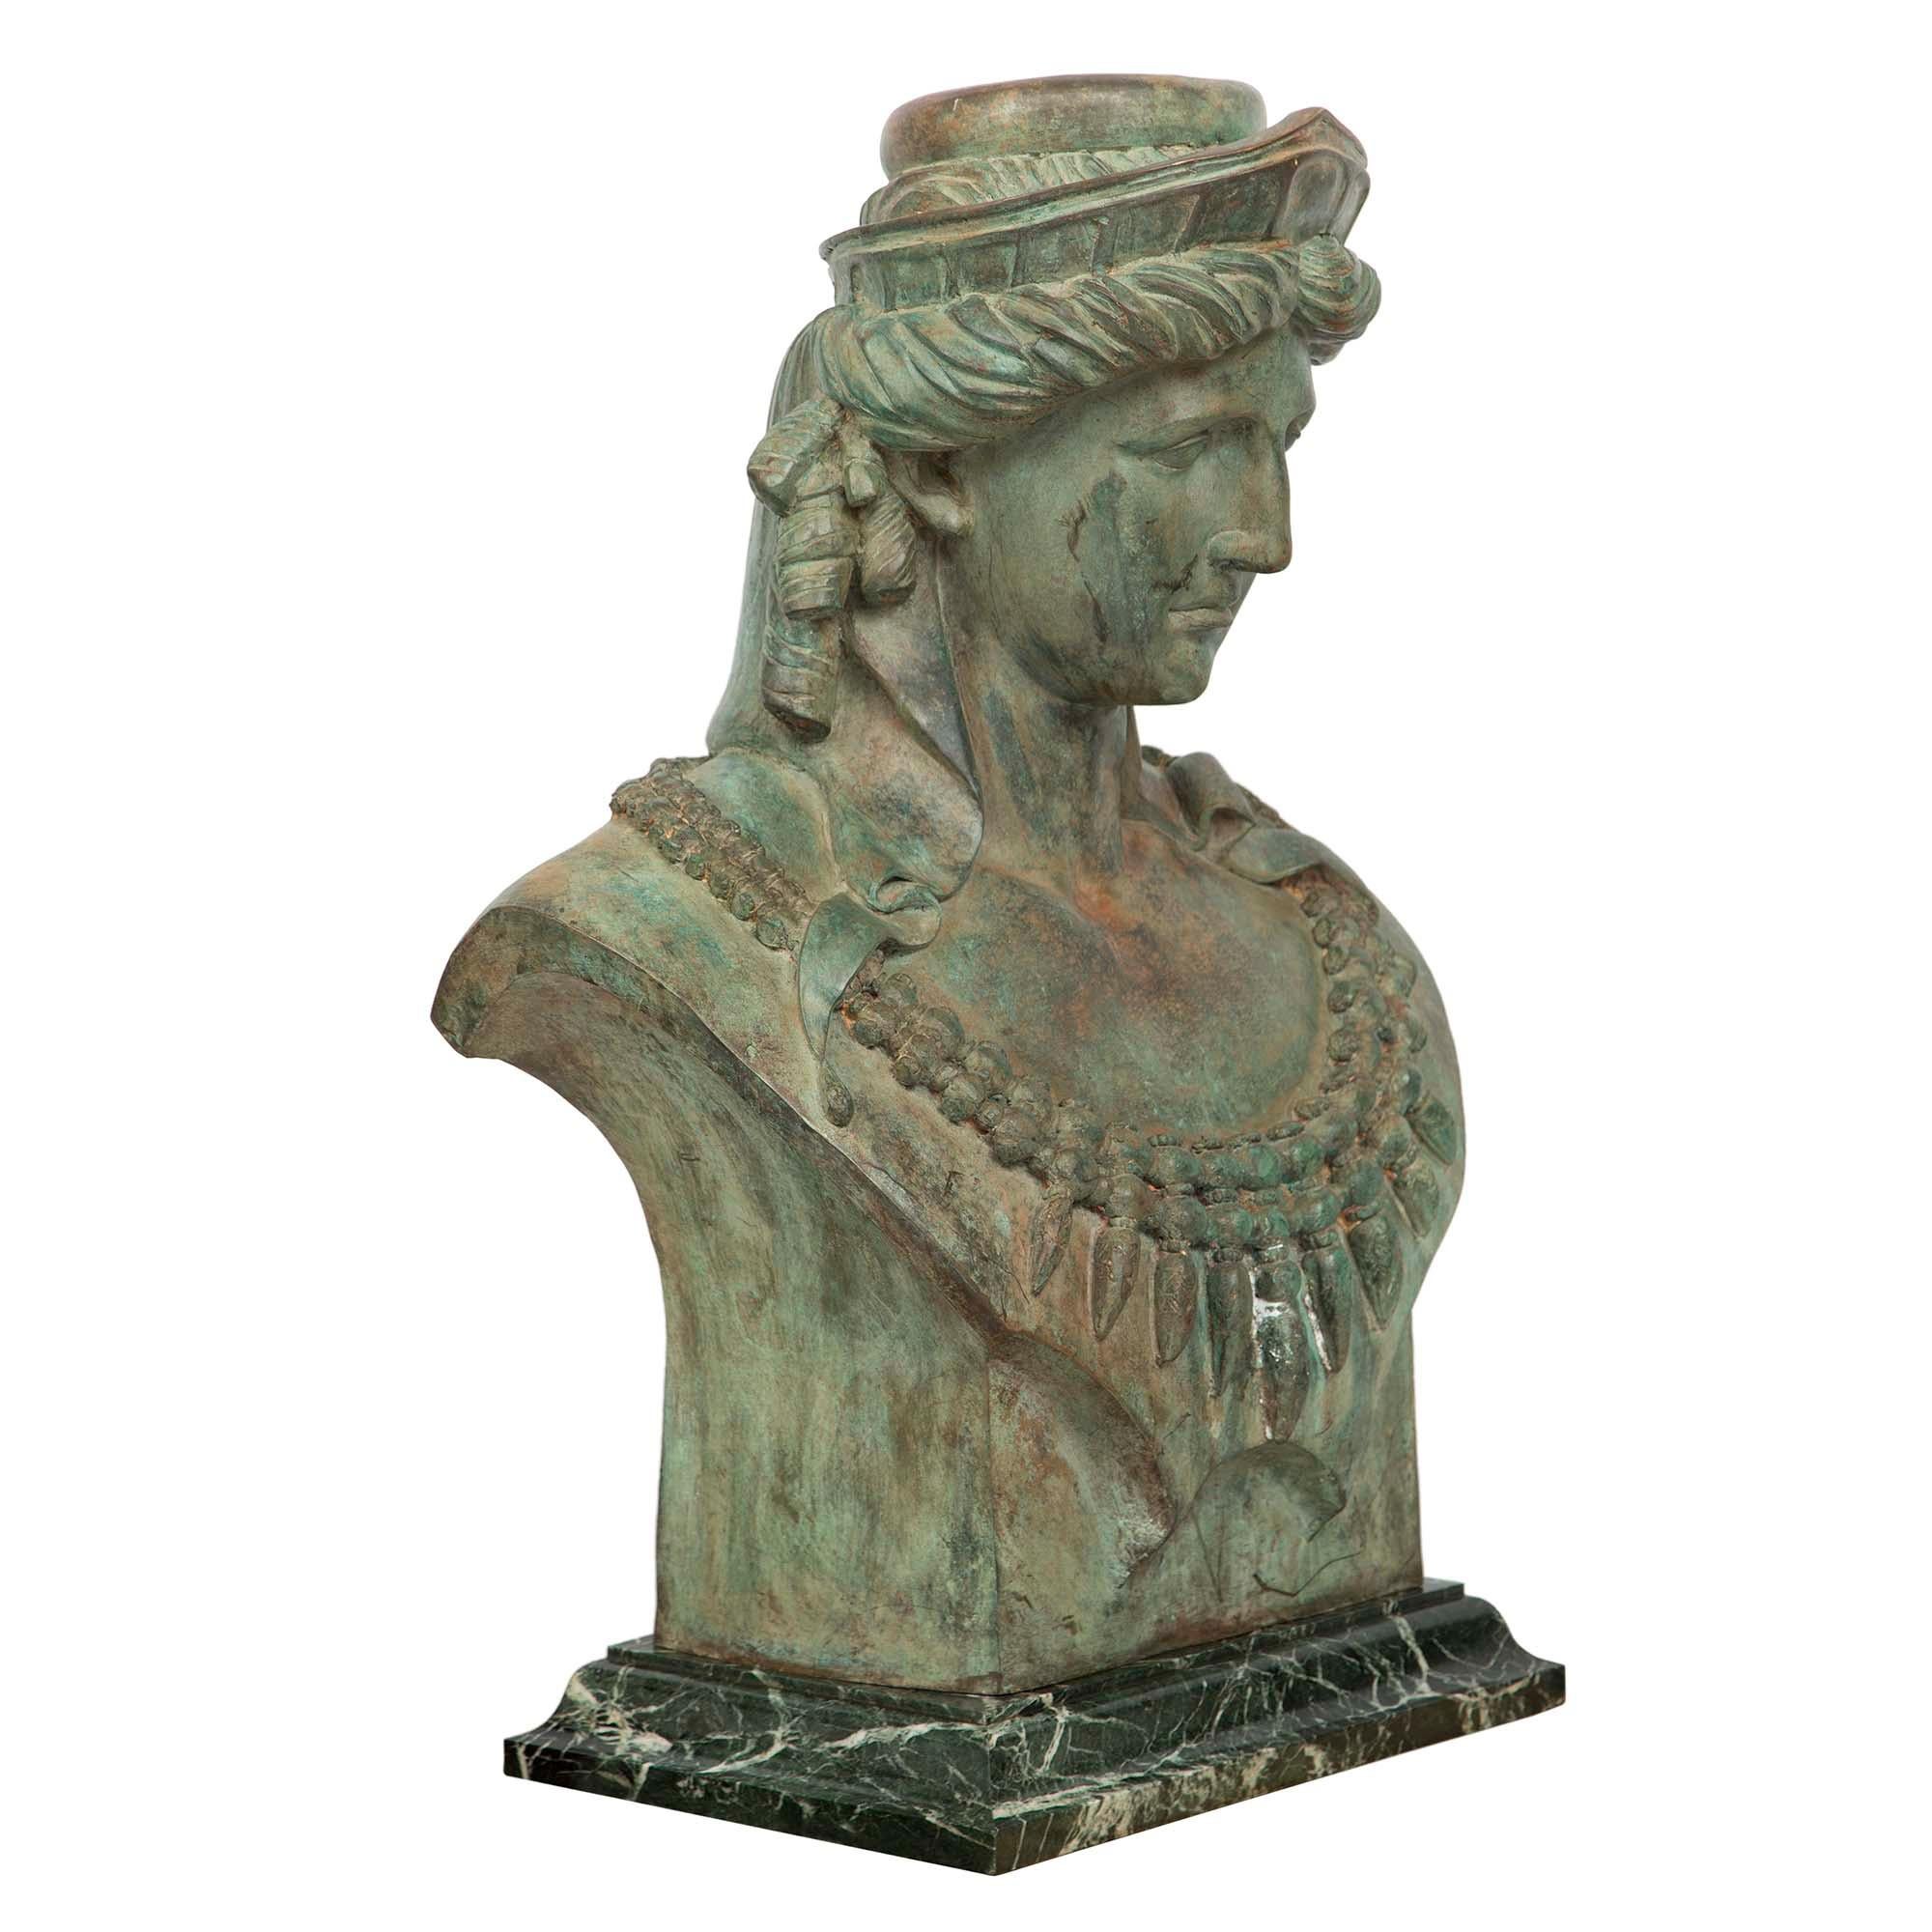 A stunning and large-scale French 19th century Verdigris patinated bronze statue of Juno. Juno is raised by a rectangular mottled Vert de Patricia marble pedestal. The bronze statue with exceptional patina throughout depicts Juno wearing a necklace